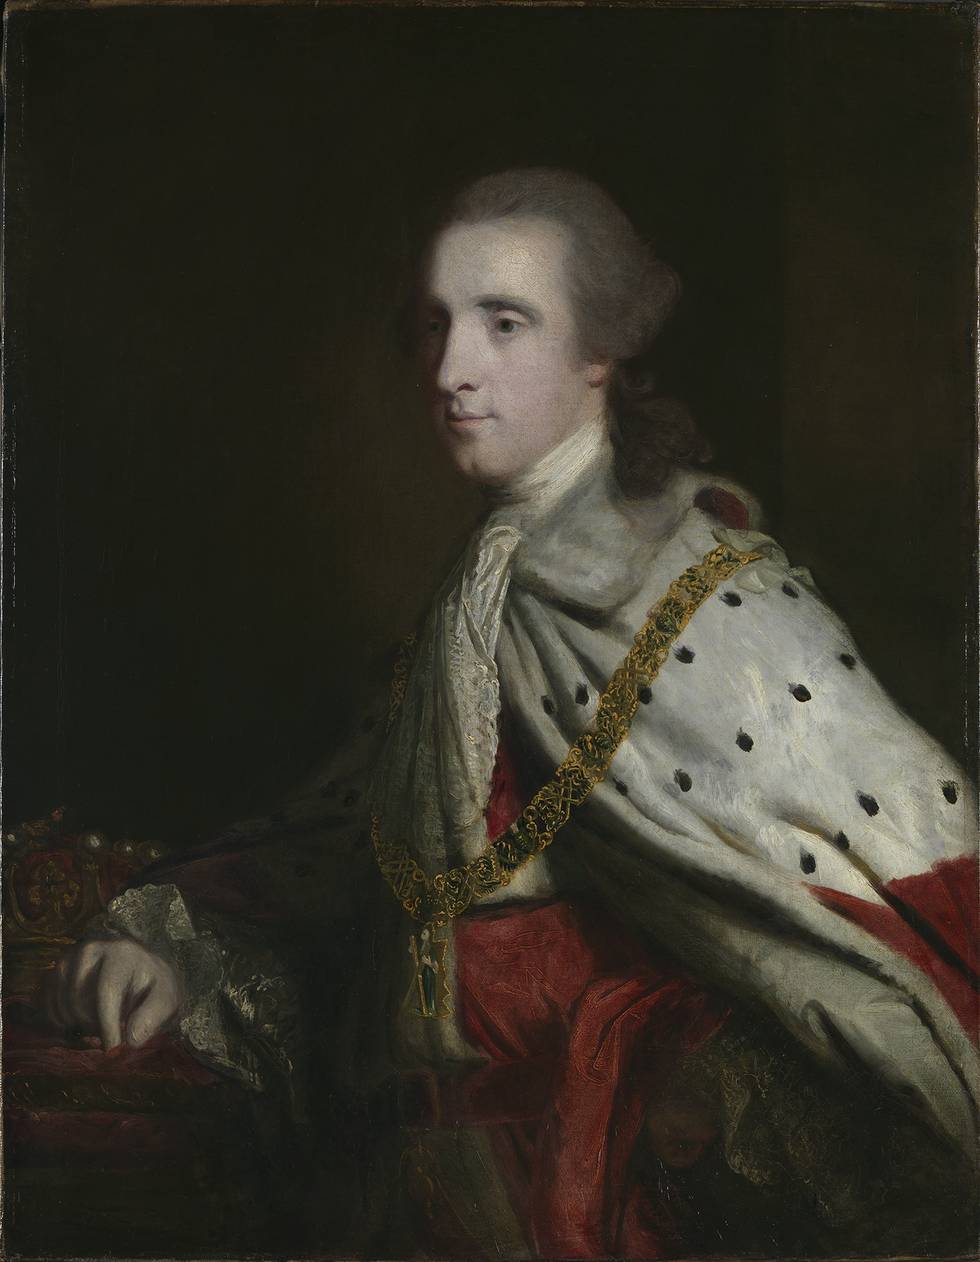 A painting of a man wearing a wig and robes